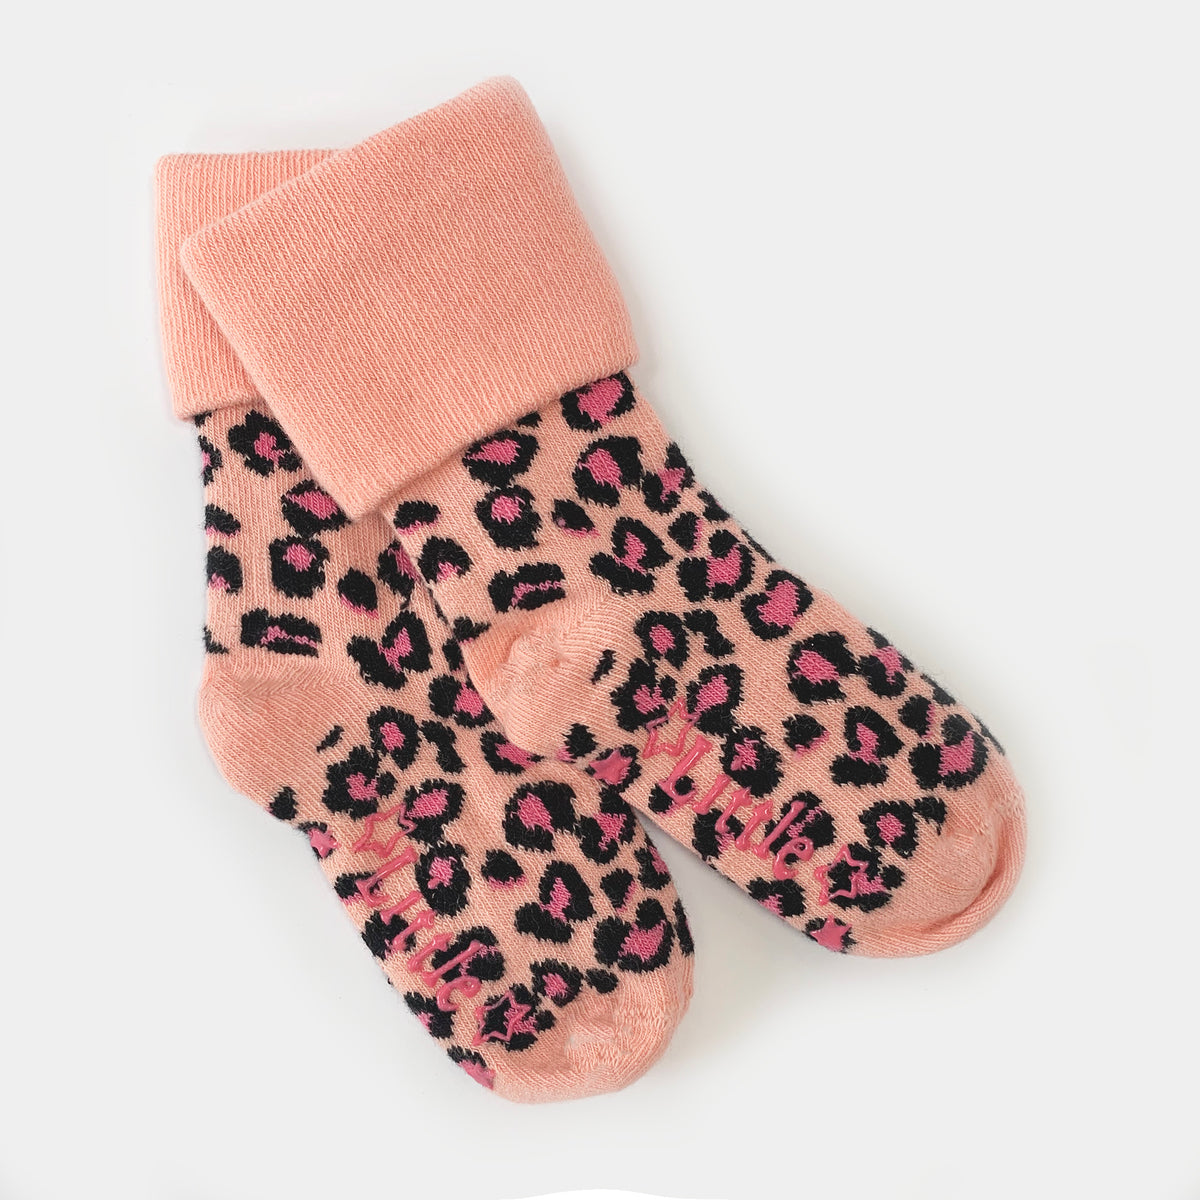 Non-Slip Stay On Baby and Toddler Socks - 3 Pack in Fairy Tale Pink, Pink Animal  & Peachy stripe